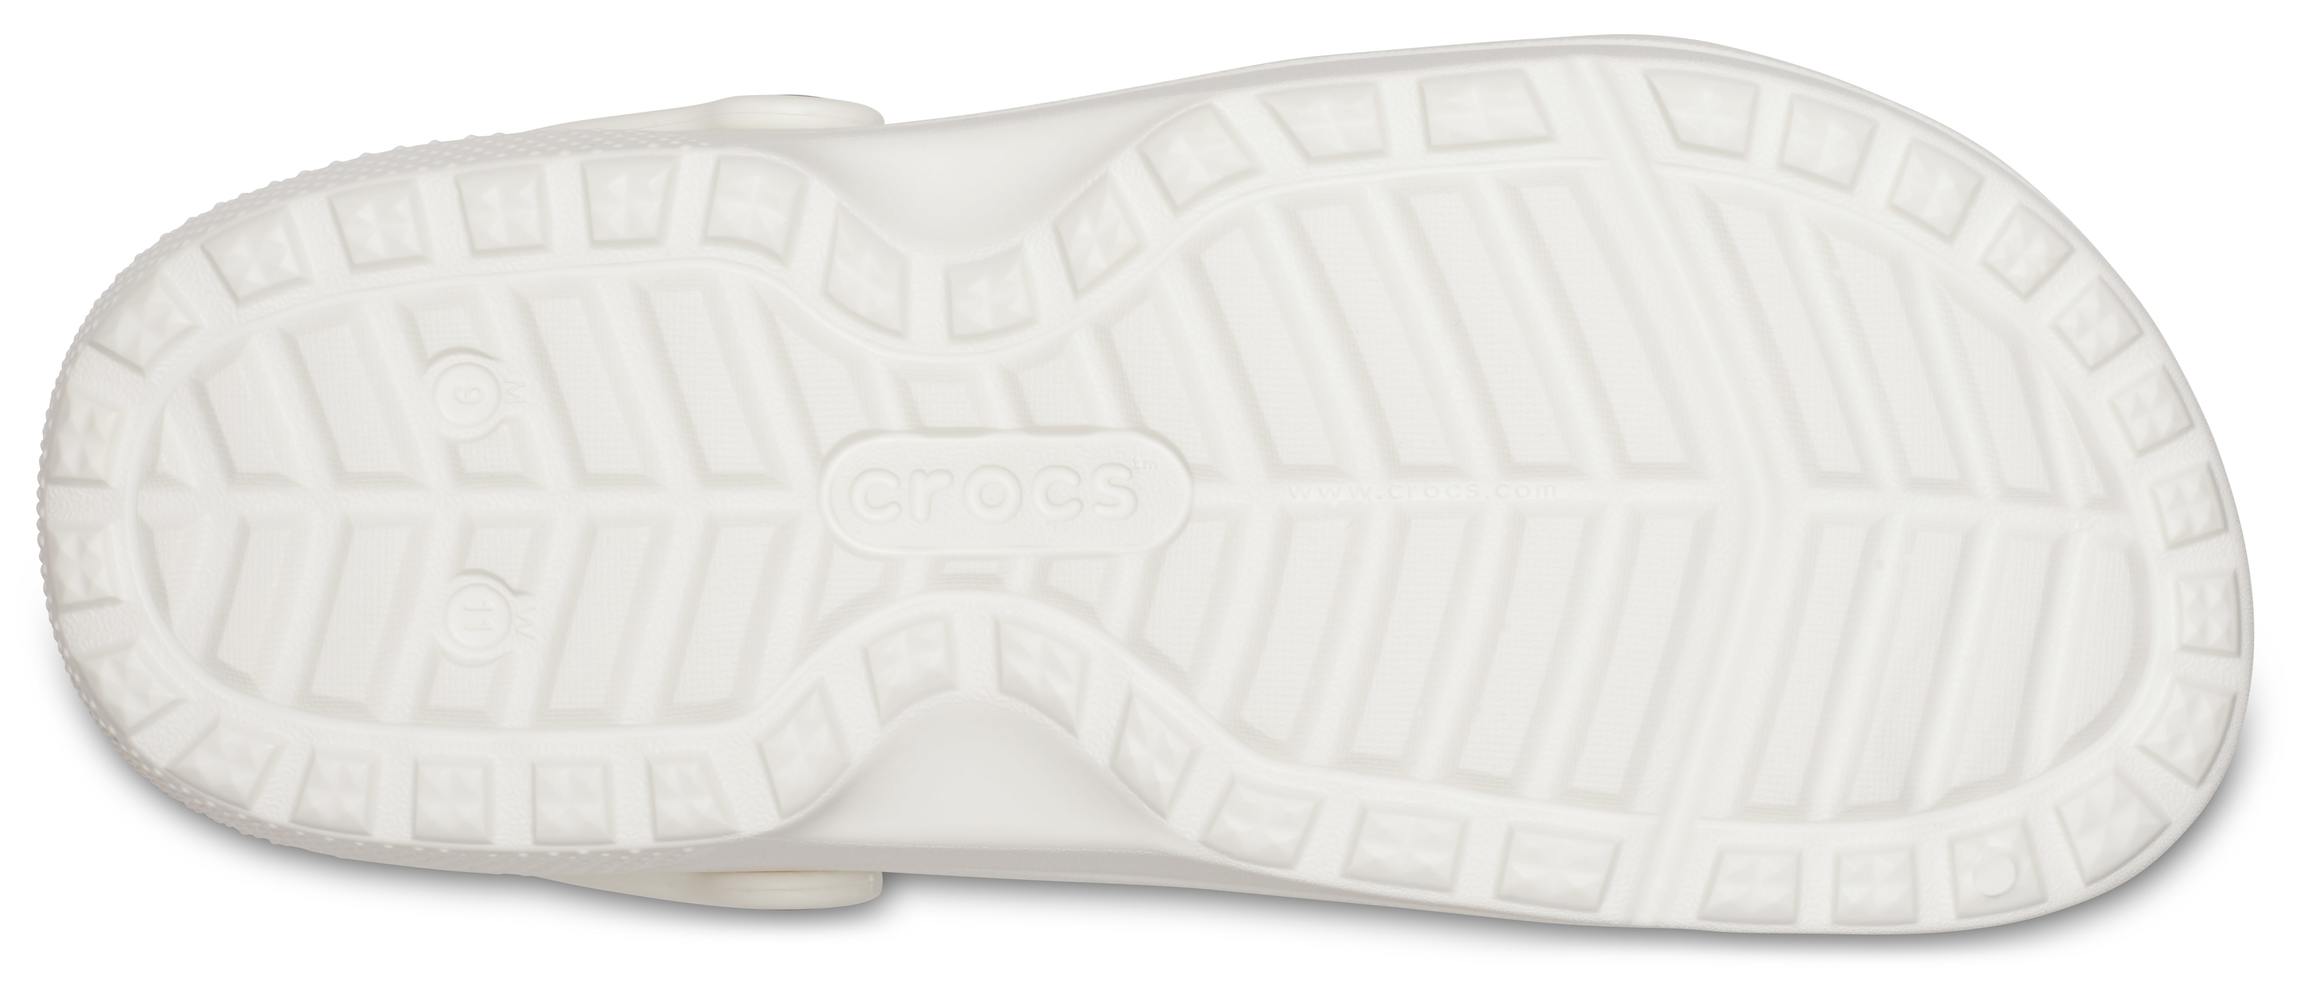 Specialist II Vent Clog White